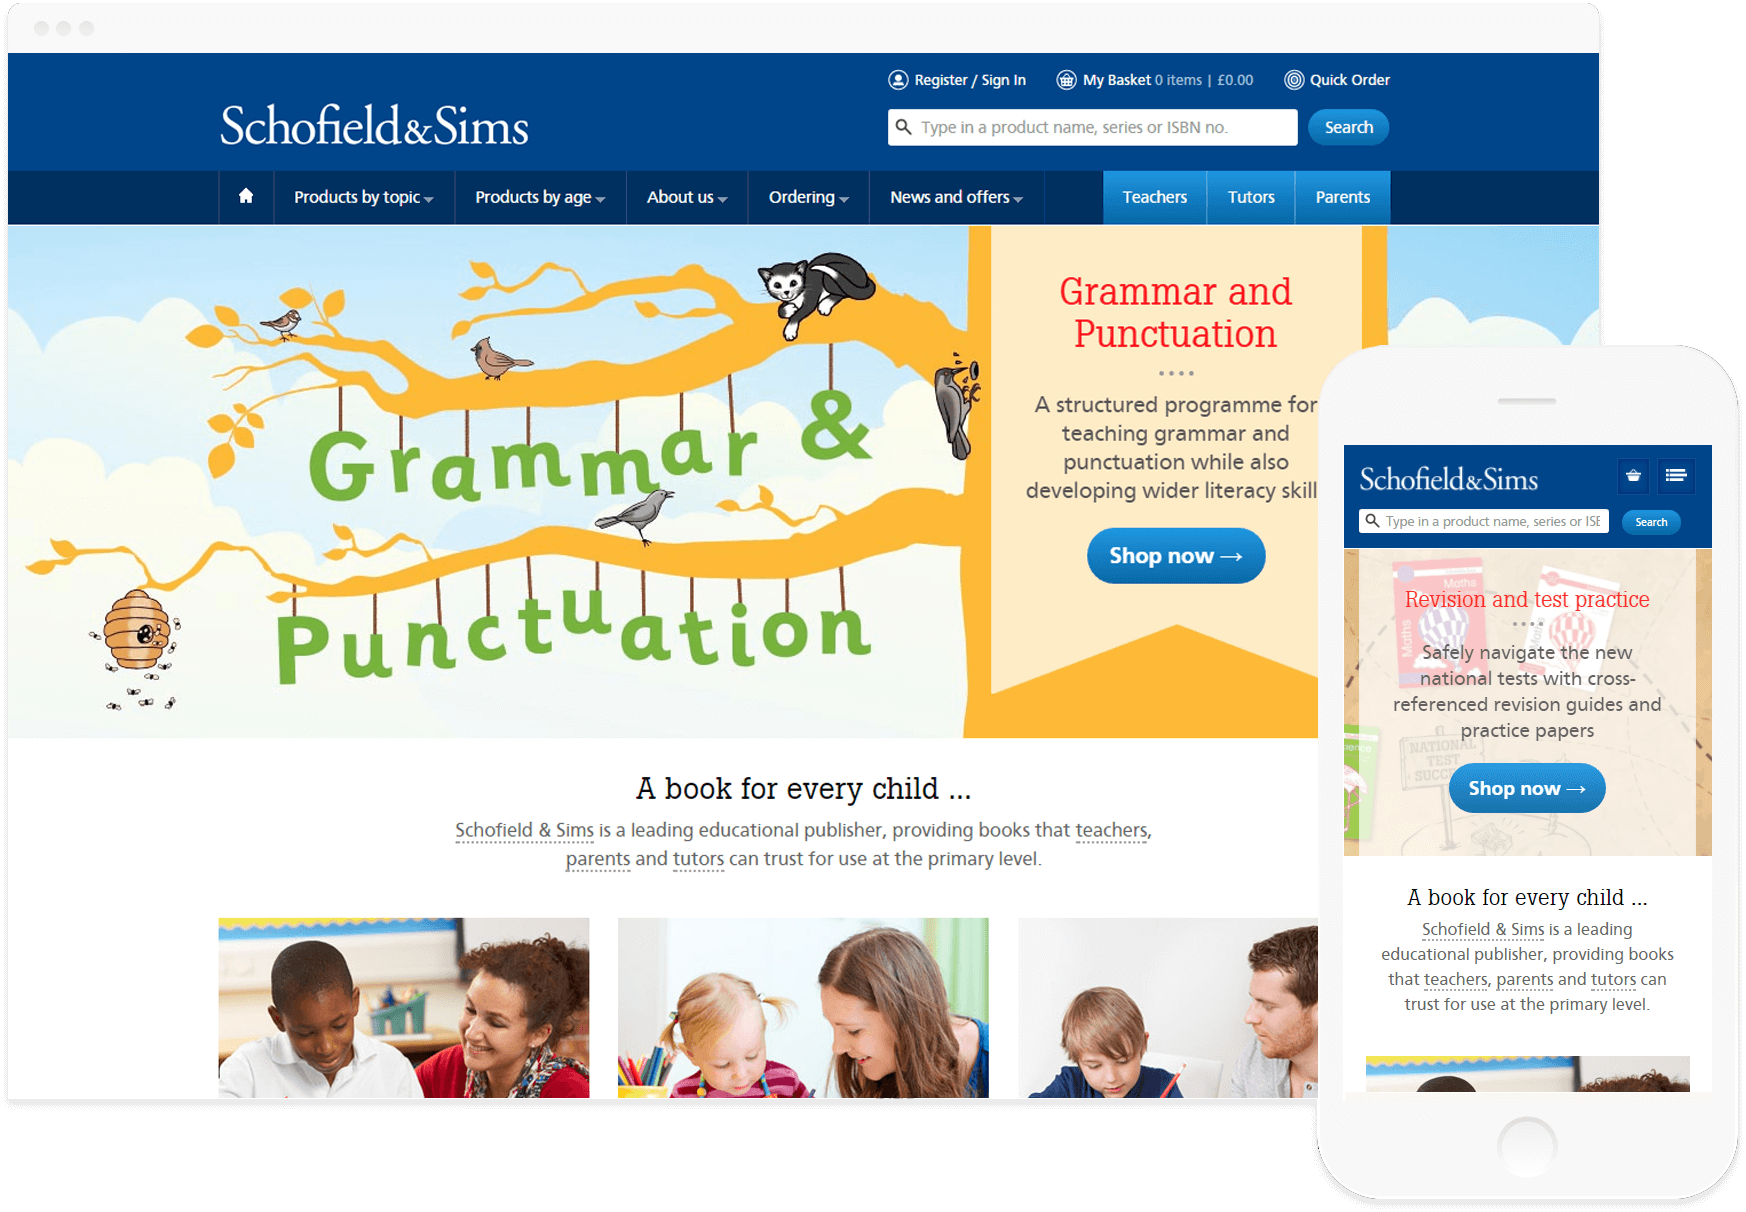 Schofield & Sims Featured Image